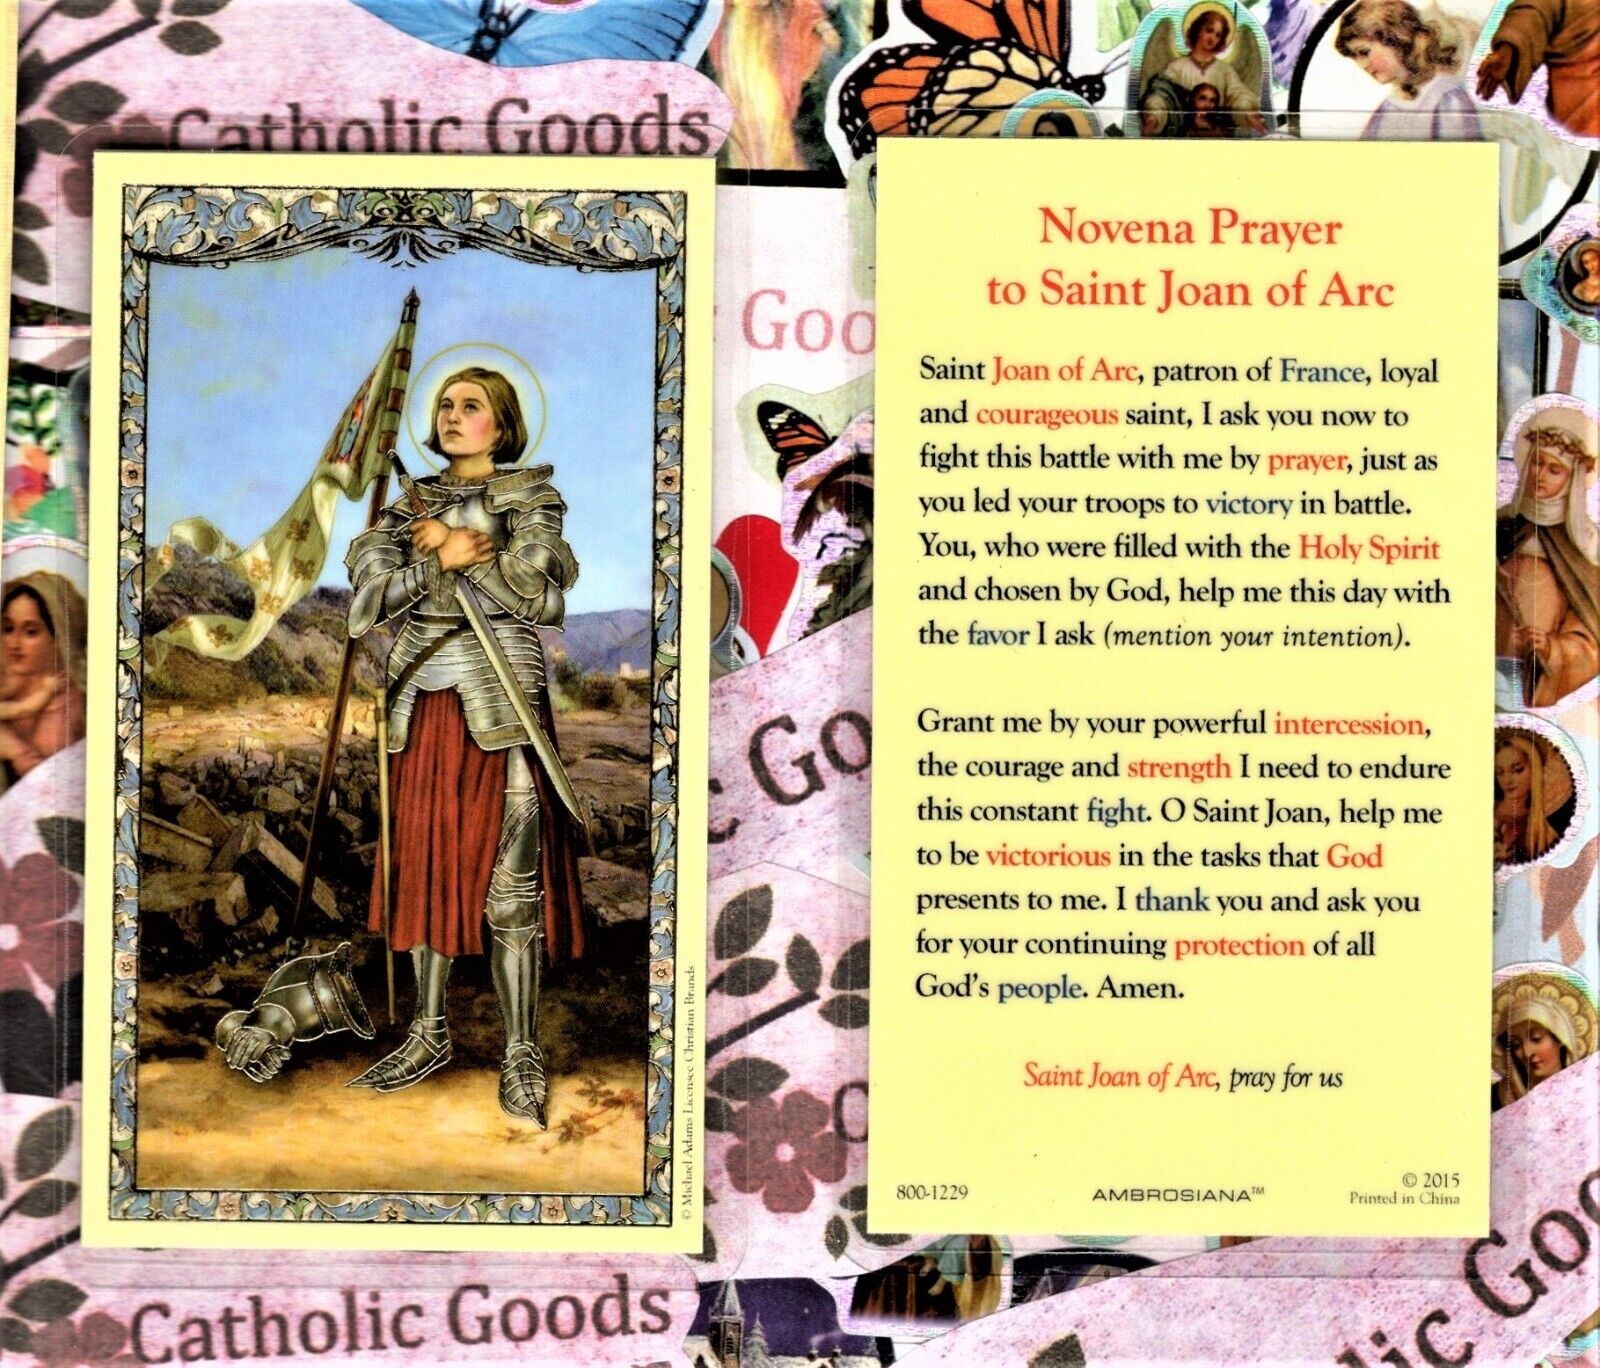 Saint St. Joan of Arc with Novena to St. Joan - Laminated Holy Card 800-1229